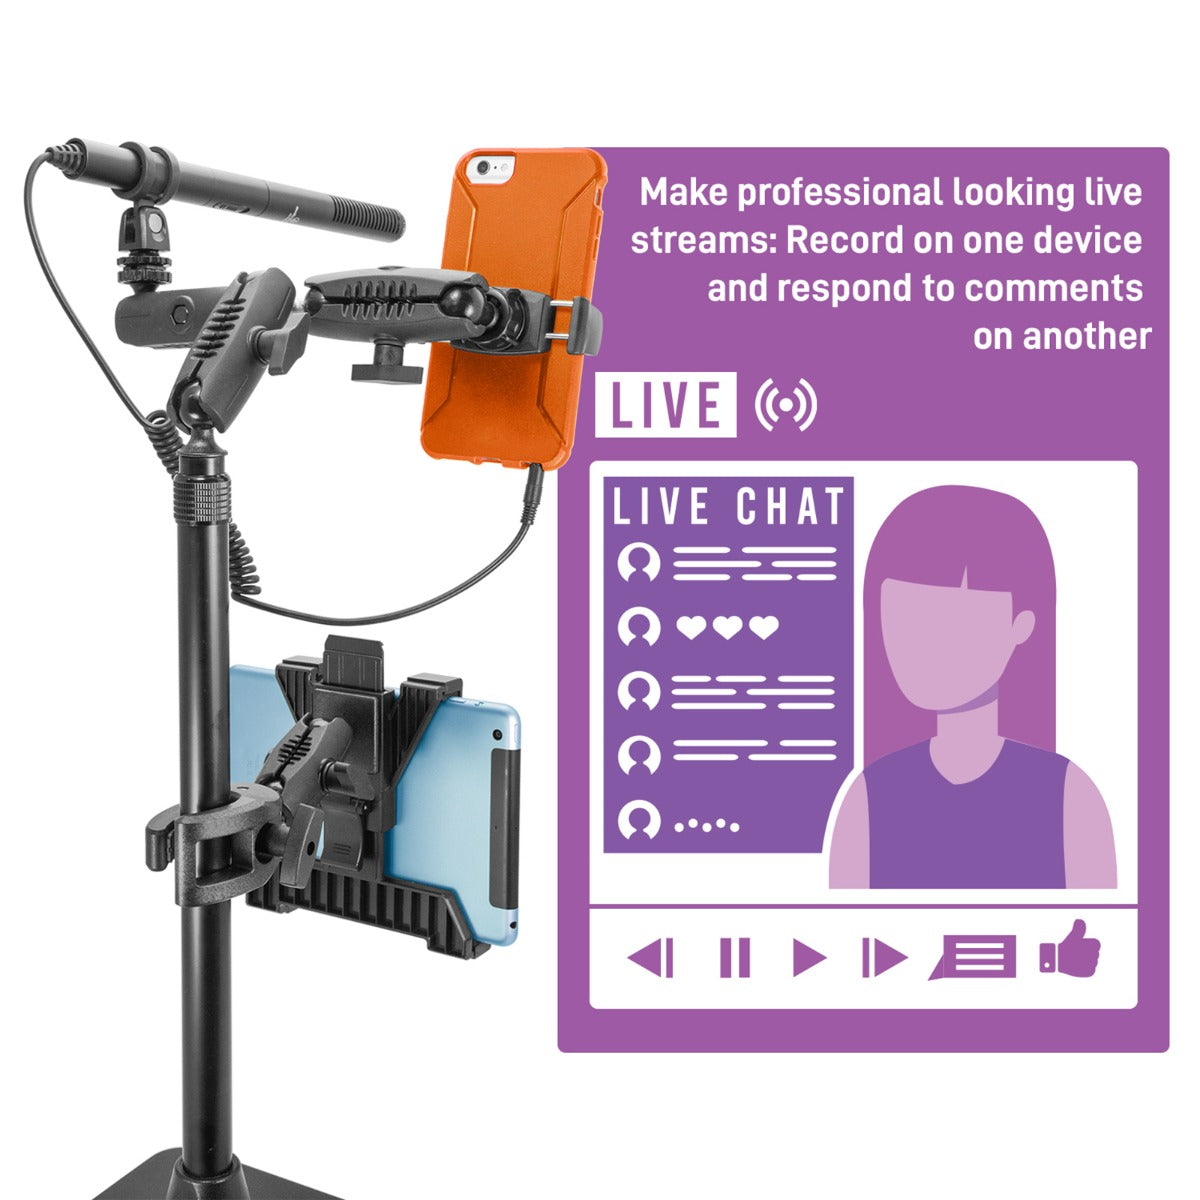 iBOLT Stream-Cast Creator Custom mount kit with over 60 variations- great for live streaming tutorial videos and photos